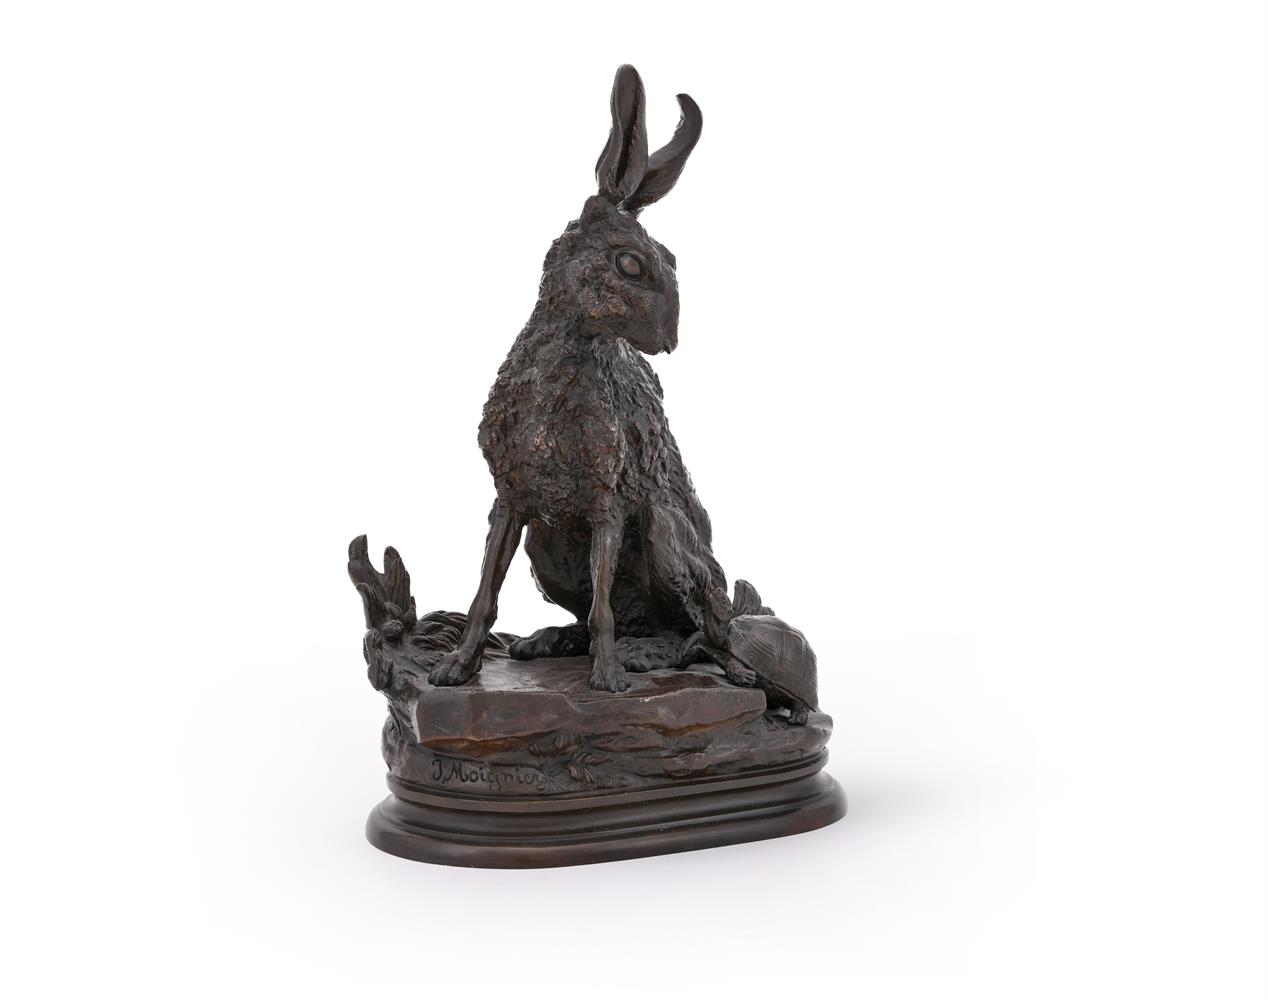 JULES MOIGNIEZ (FRENCH, 1835-1894), A LARGE BRONZE GROUP OF THE HARE AND THE TORTOISE - Image 2 of 6